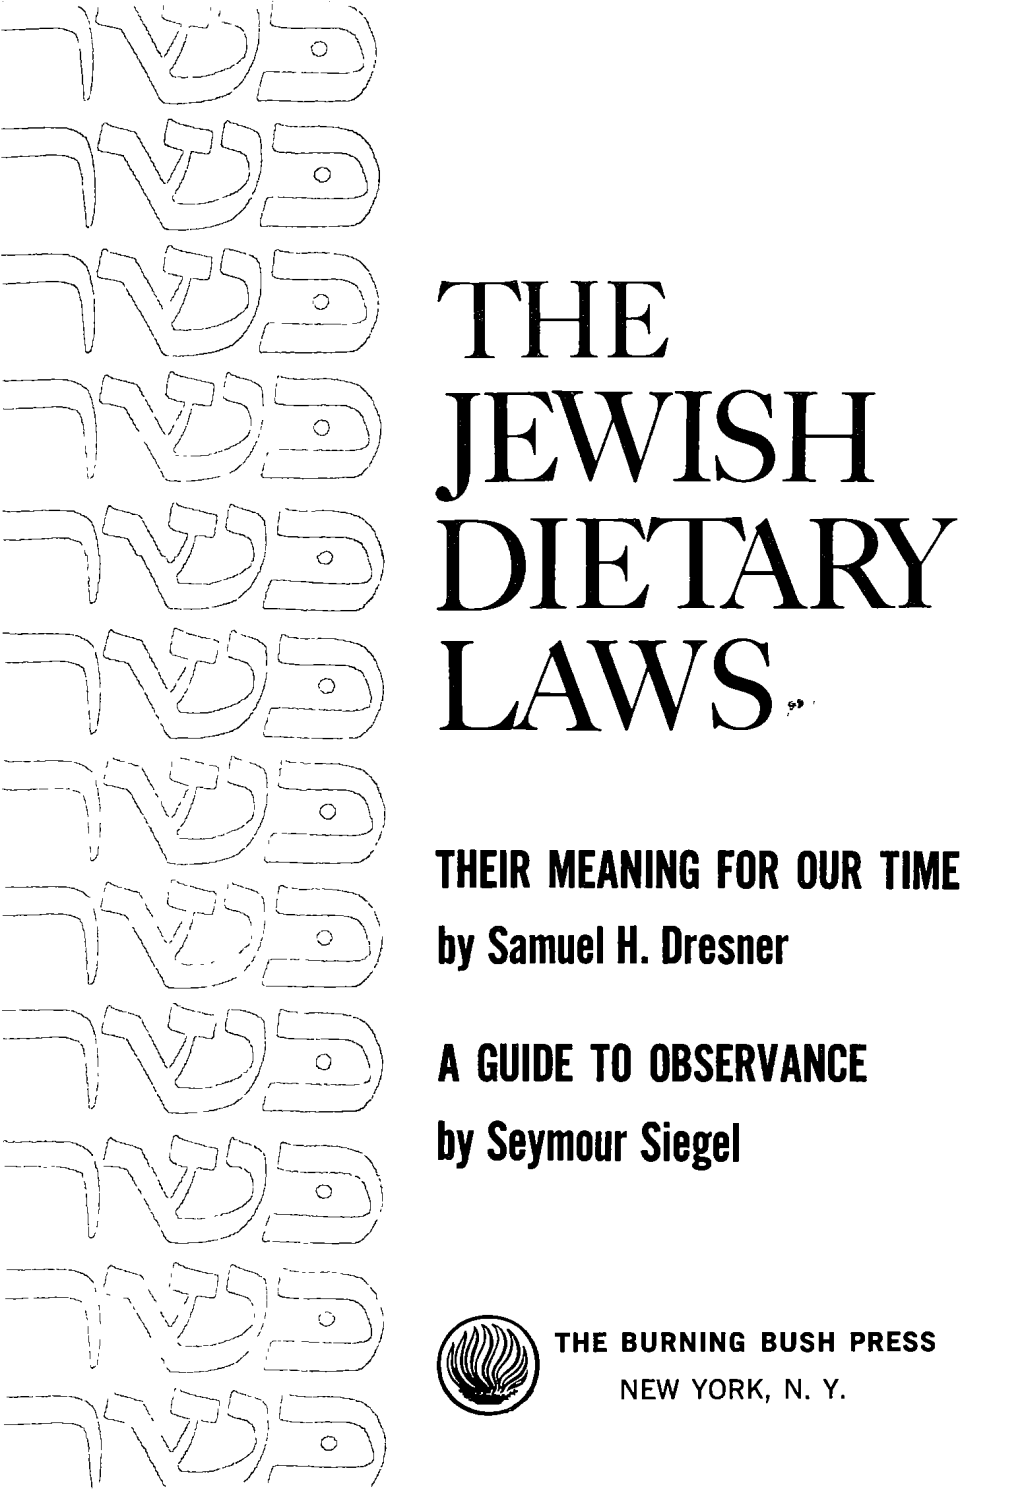 The Jewish Dietary Laws Is Treated in Rabbi Samuel H